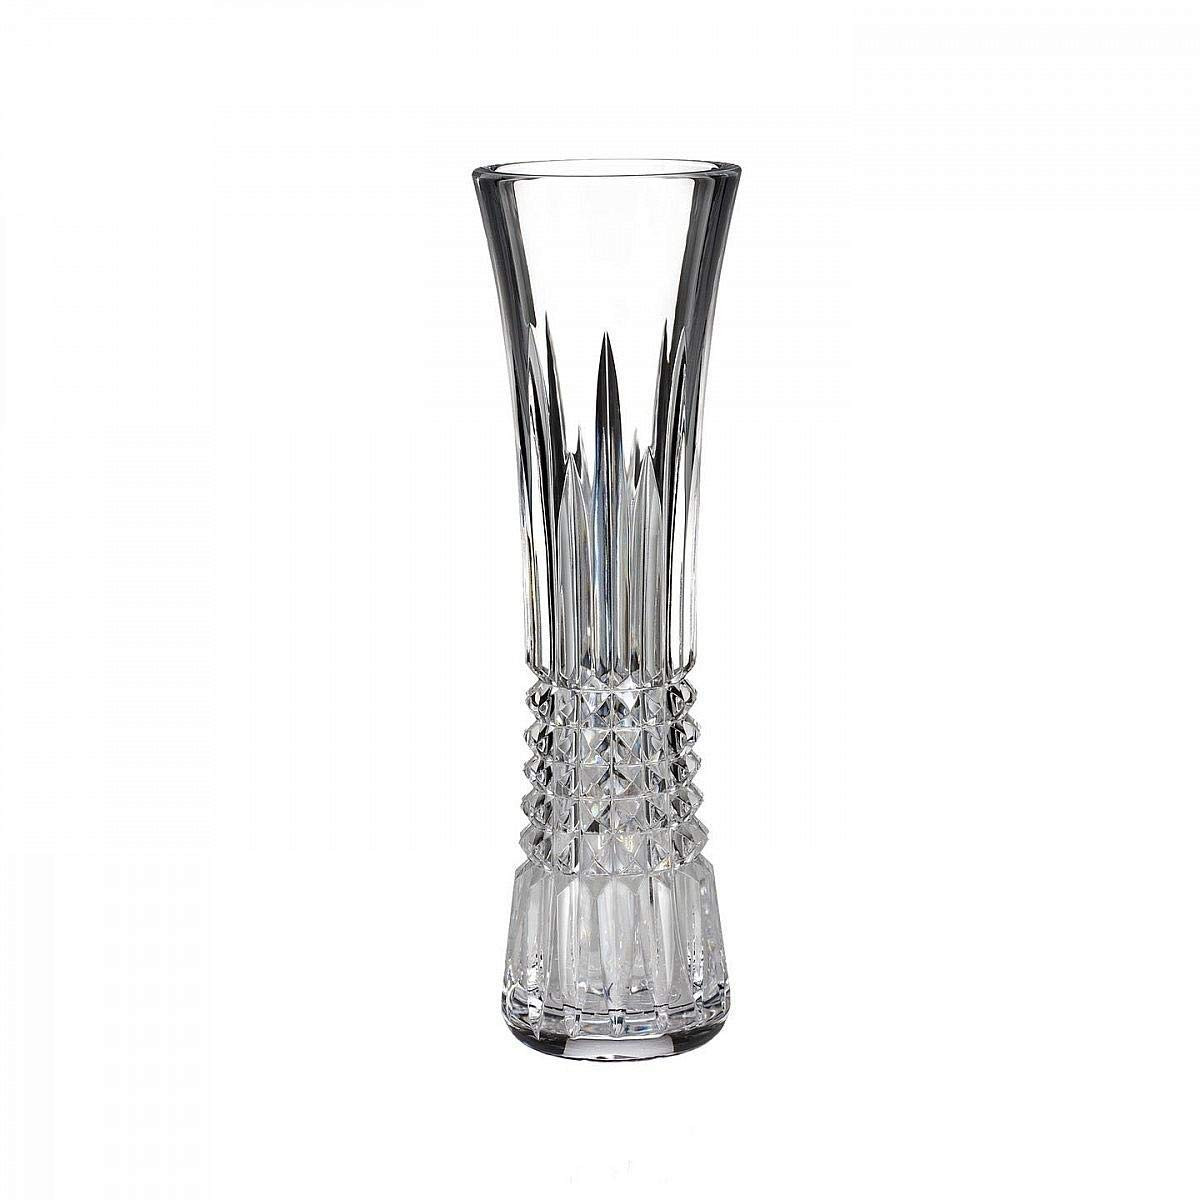 marquis by waterford markham vase 9 of amazon com waterford crystal lismore diamond bud vase home kitchen with regard to 61vi6udt1il sl1200